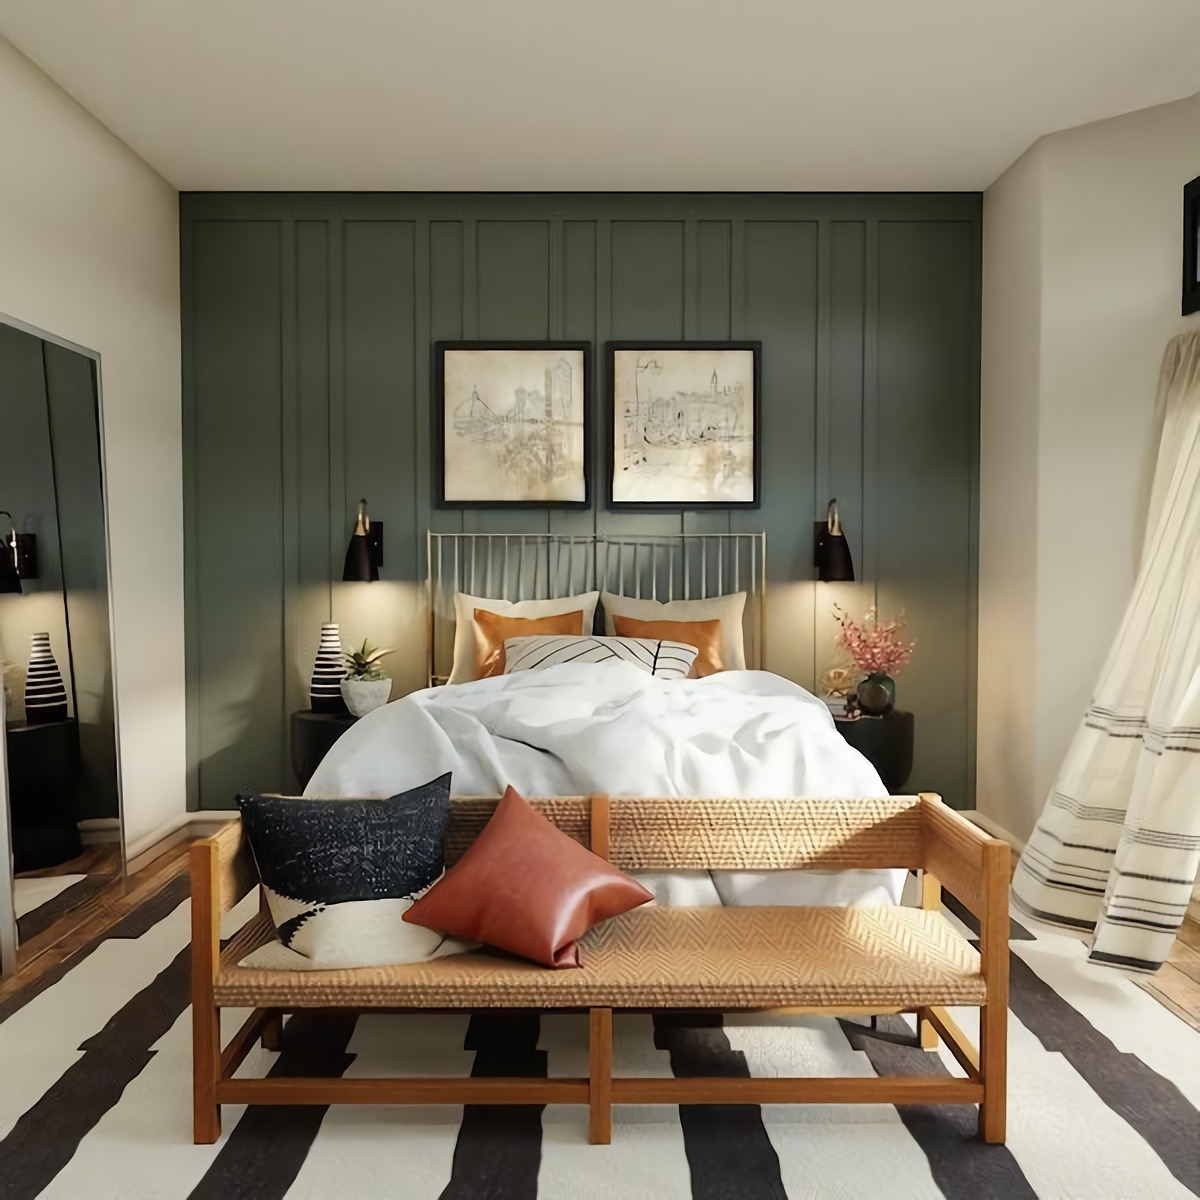 How To Make A Room Look Bigger: 7 Best Paint Colors For Small Rooms